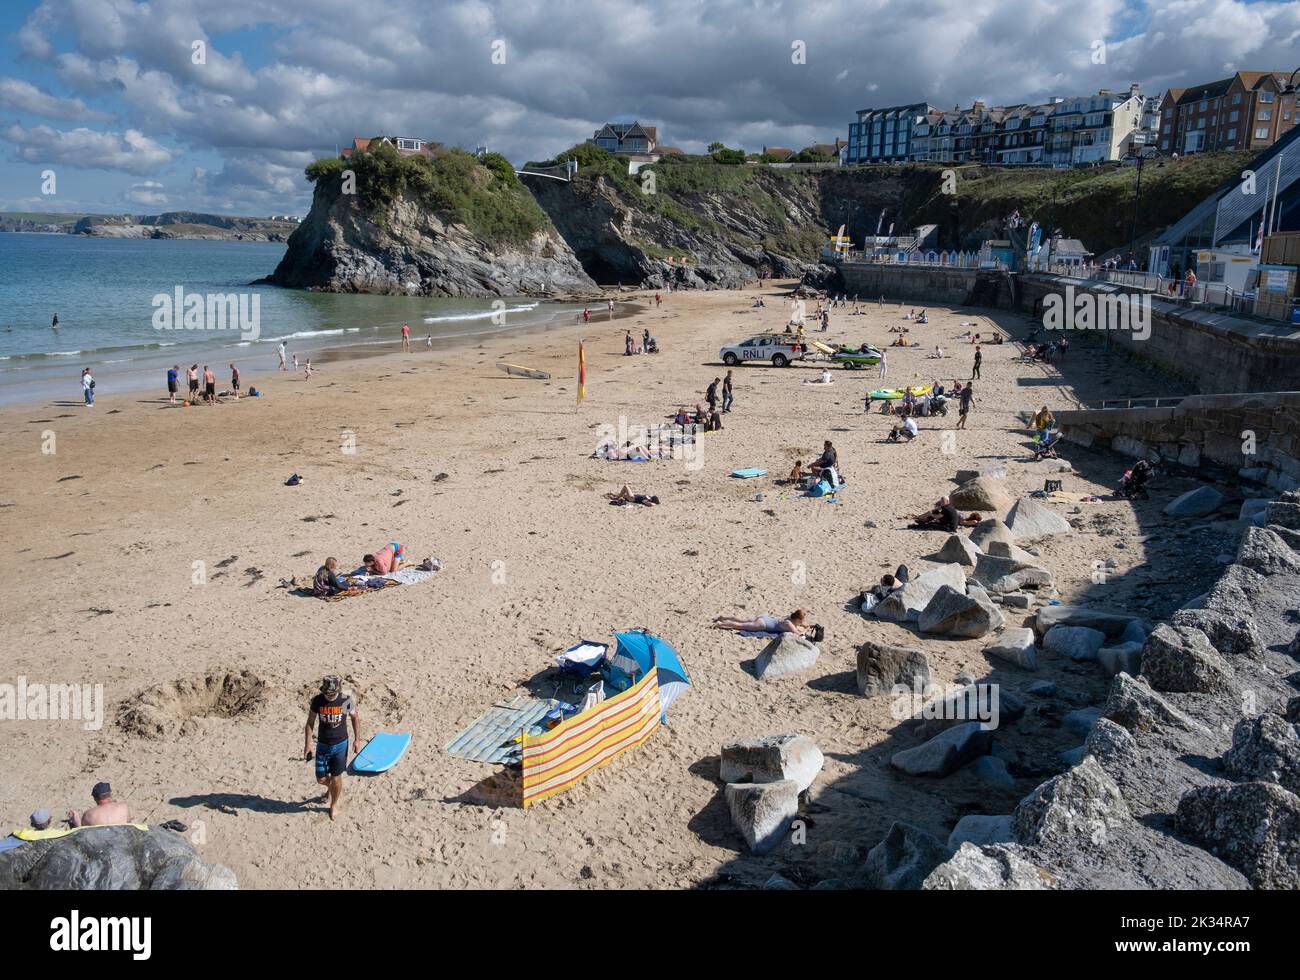 A view of Towan Beach, Newquay on the north coast of Cornwall, England. Stock Photo